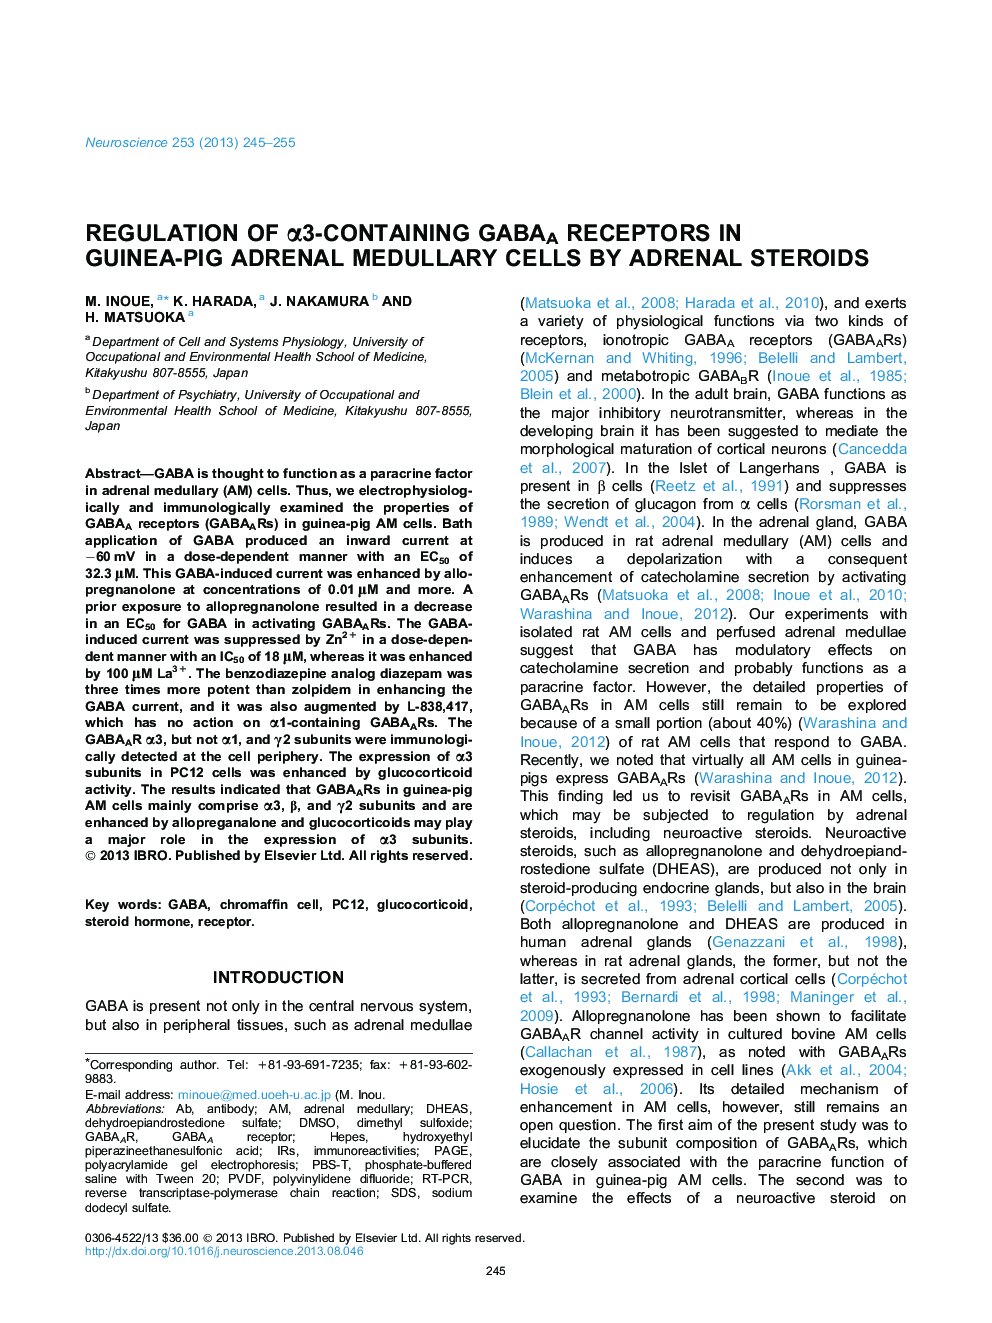 Regulation of Î±3-containing GABAA receptors in guinea-pig adrenal medullary cells by adrenal steroids